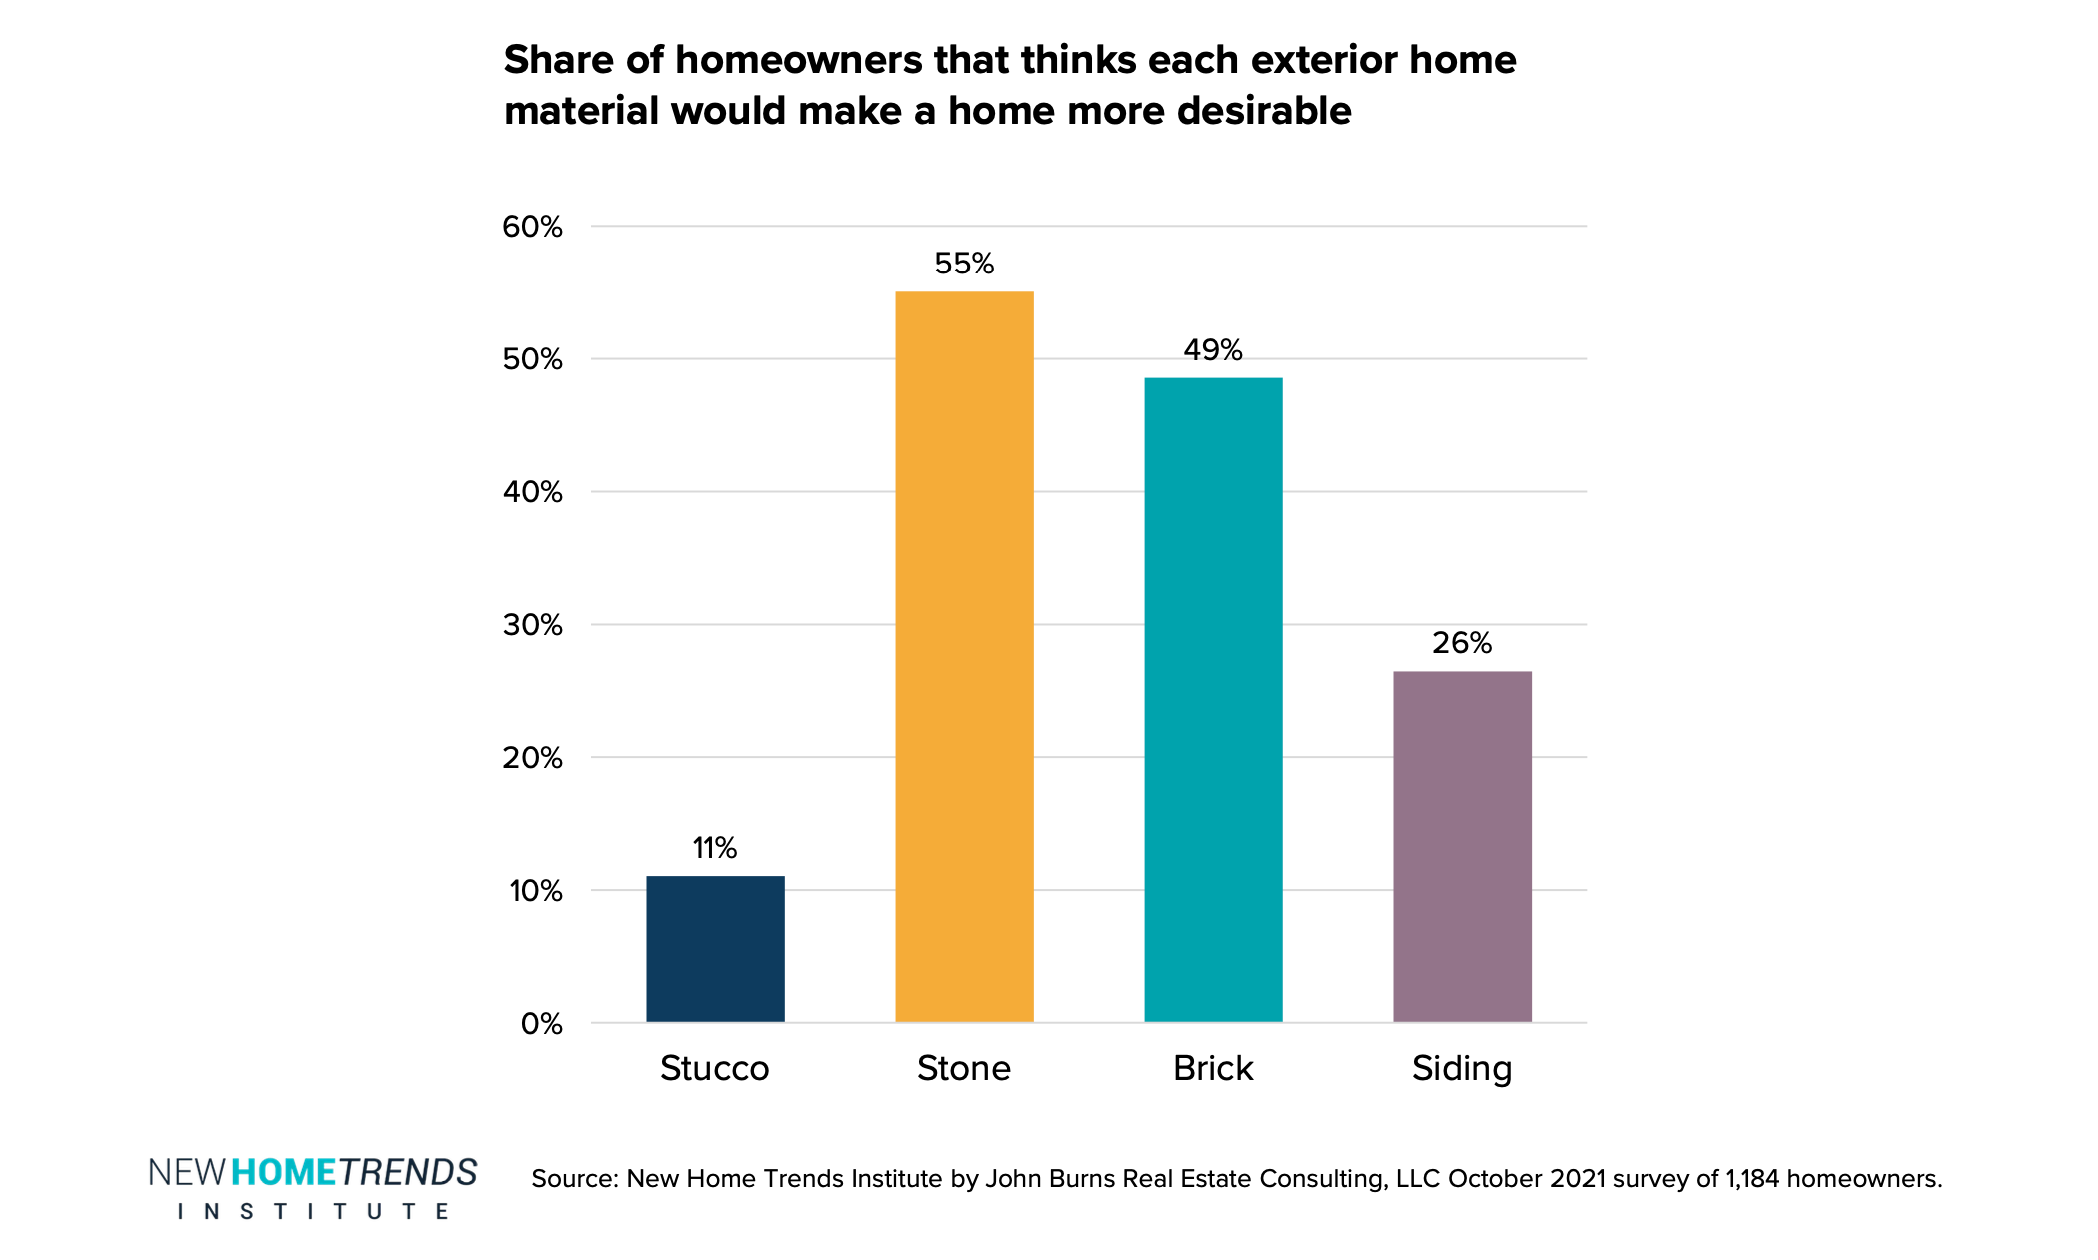 Share of homeowners that think each exterior home material would make a home more desirable graph